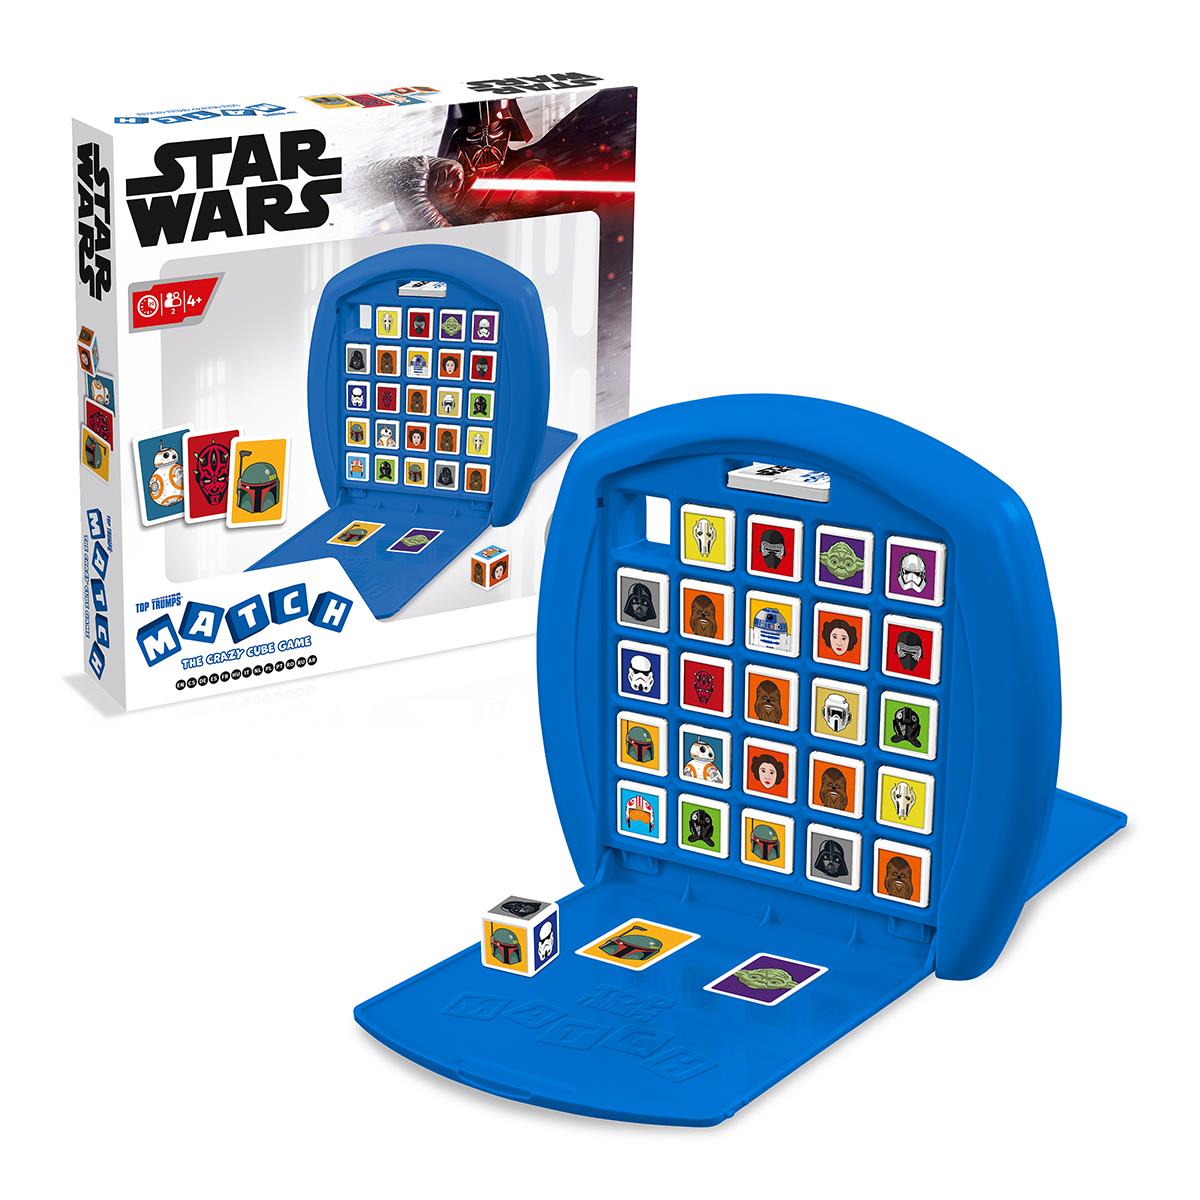 Star Wars Top Trumps Match - The Crazy Cube Game